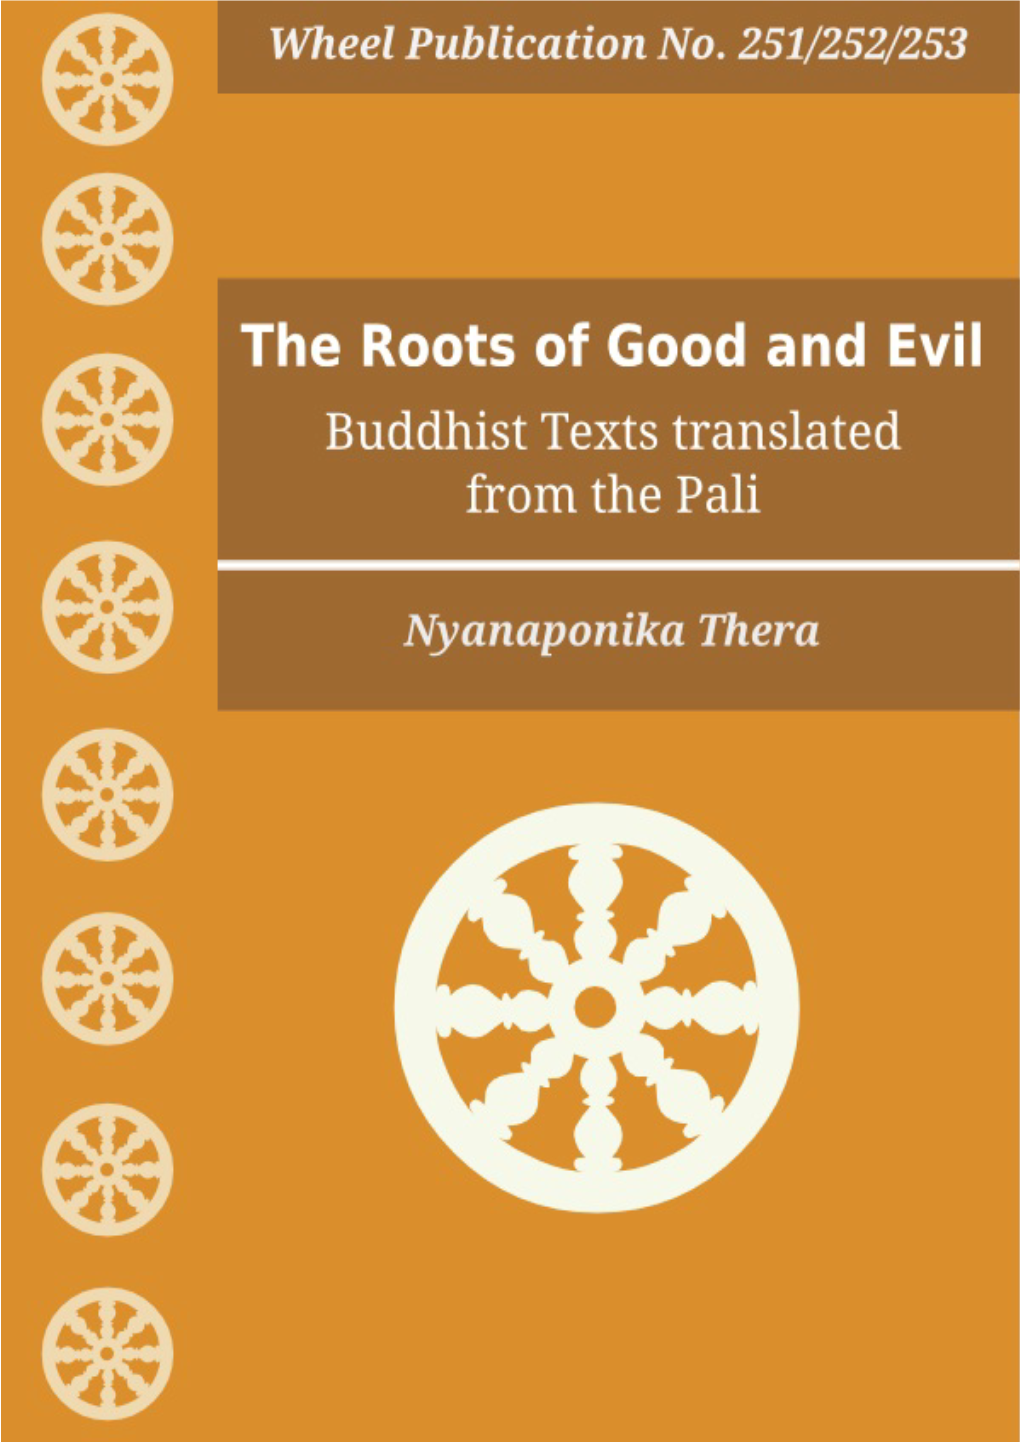 The Roots of Good and Evil by Nyanaponika Thera